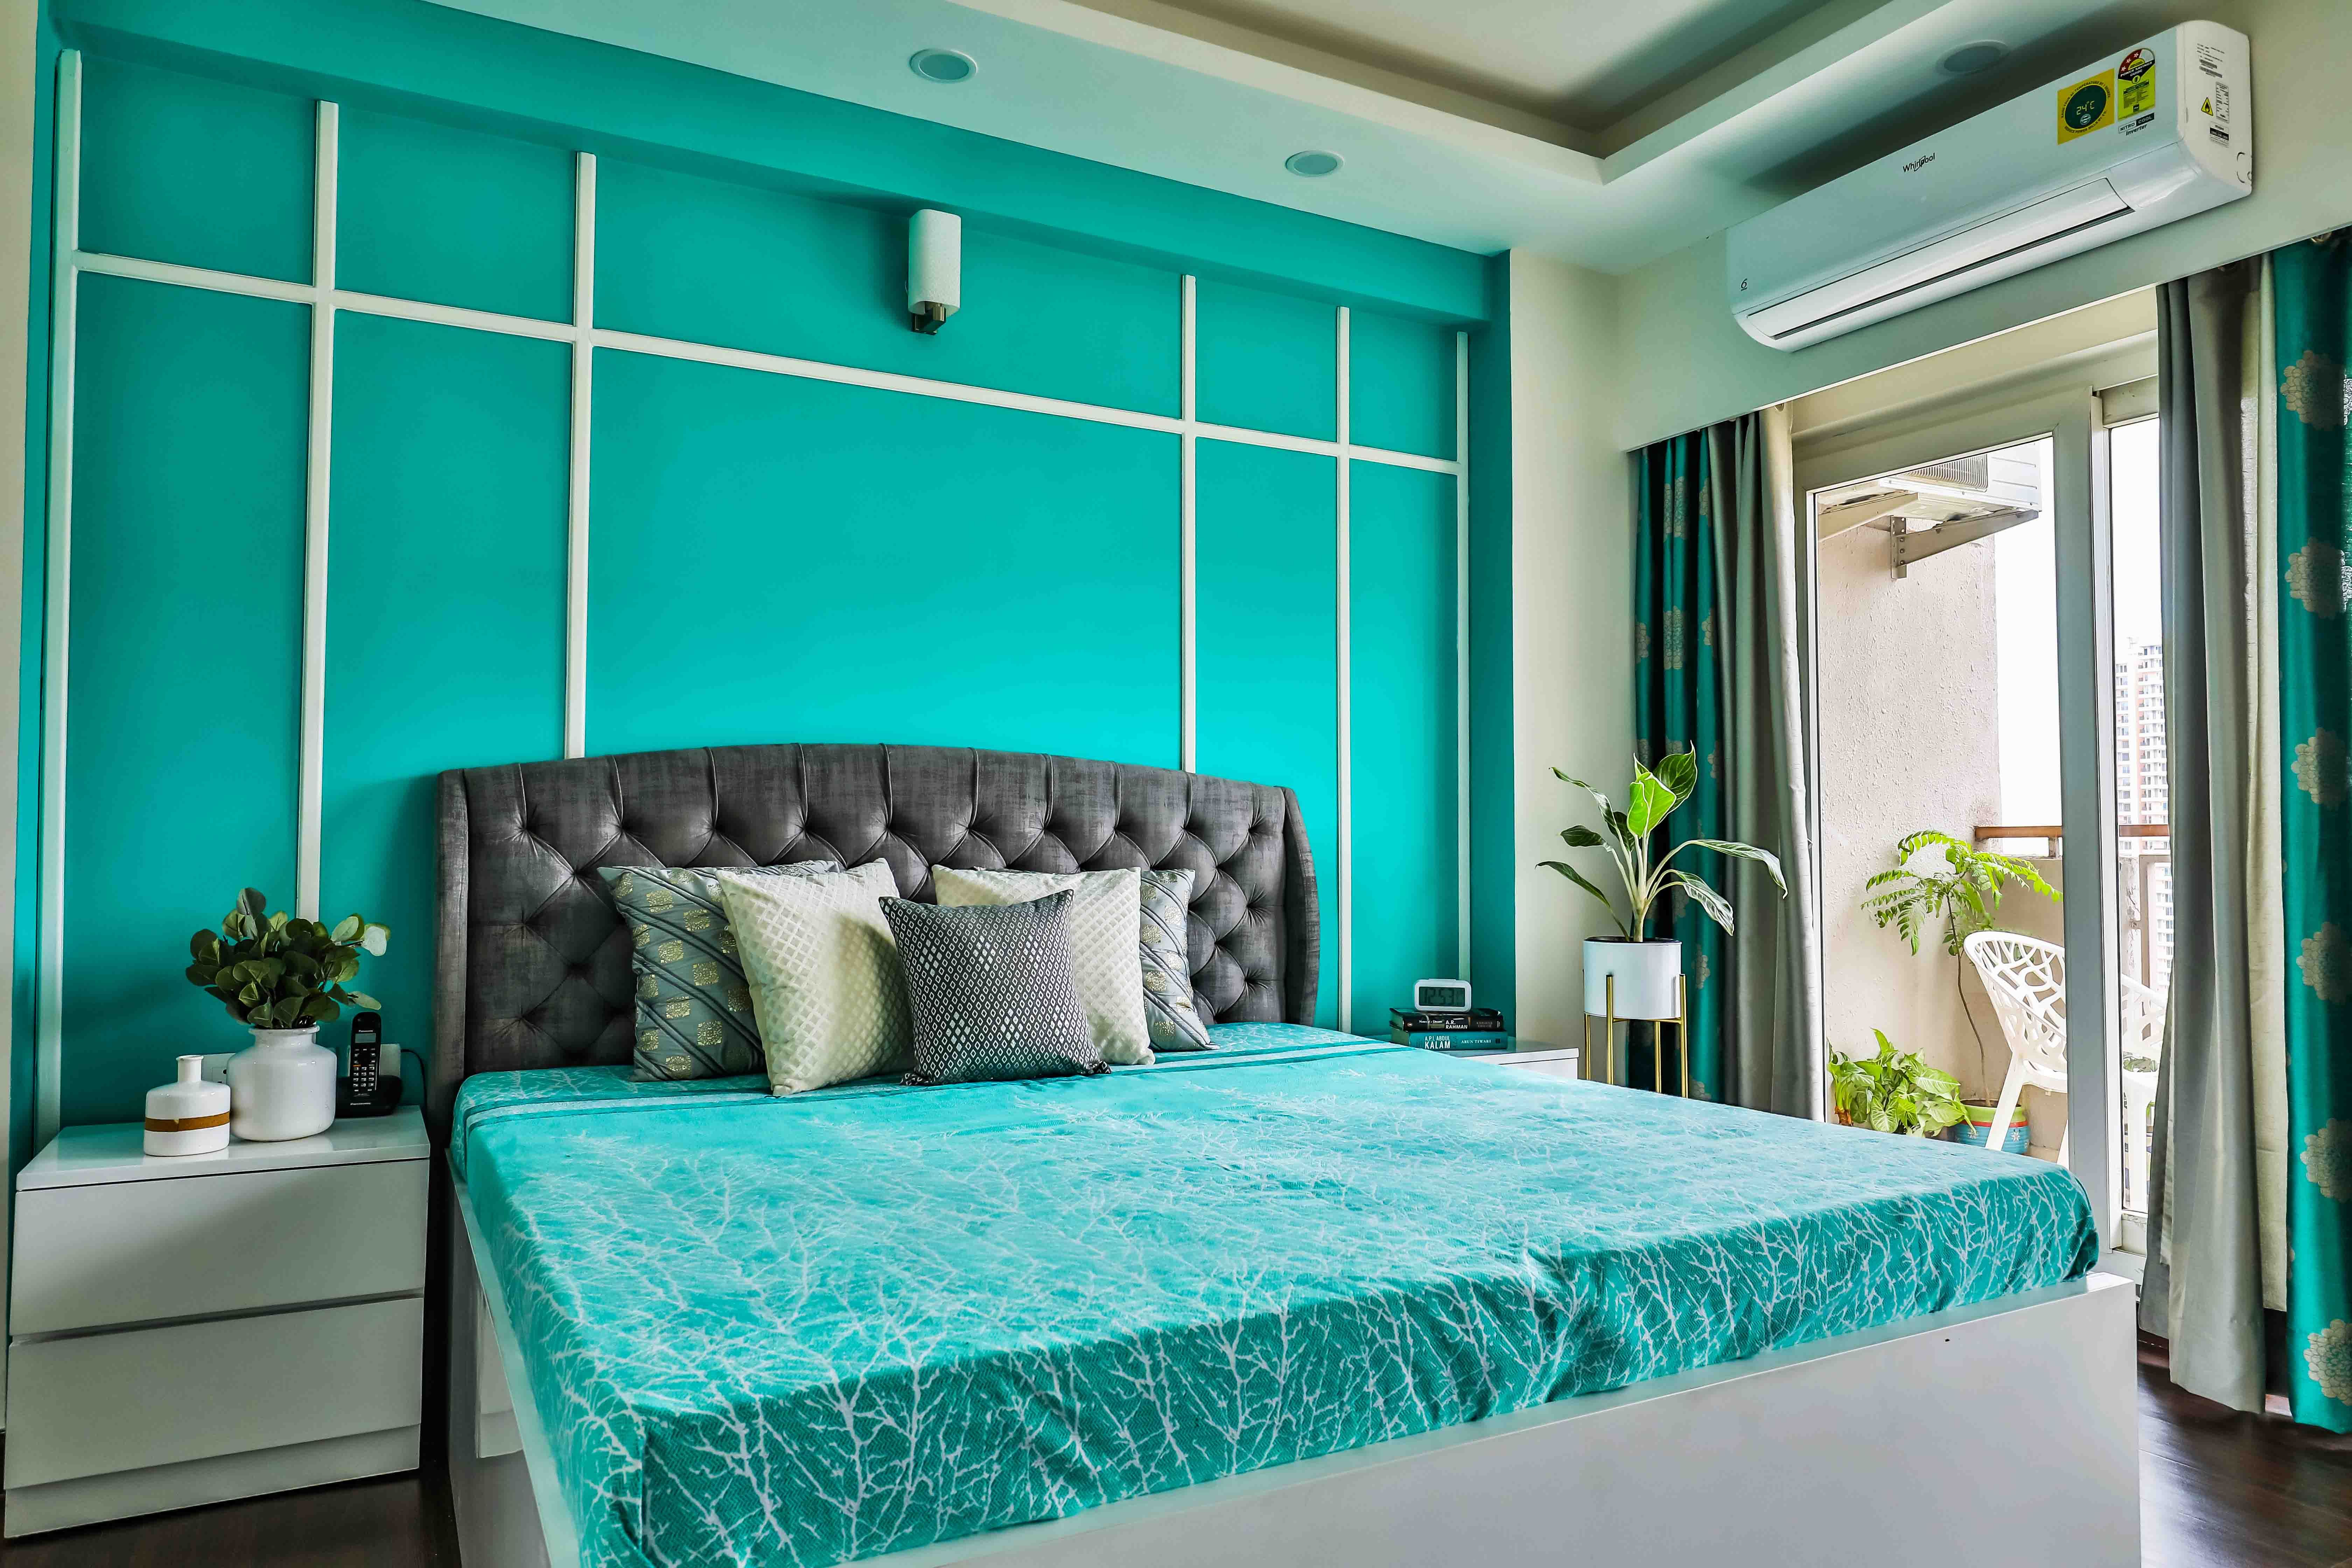 Modern Turquoise Guest Room Design With Queen-Sized Bed And Grey Tufted Headboard